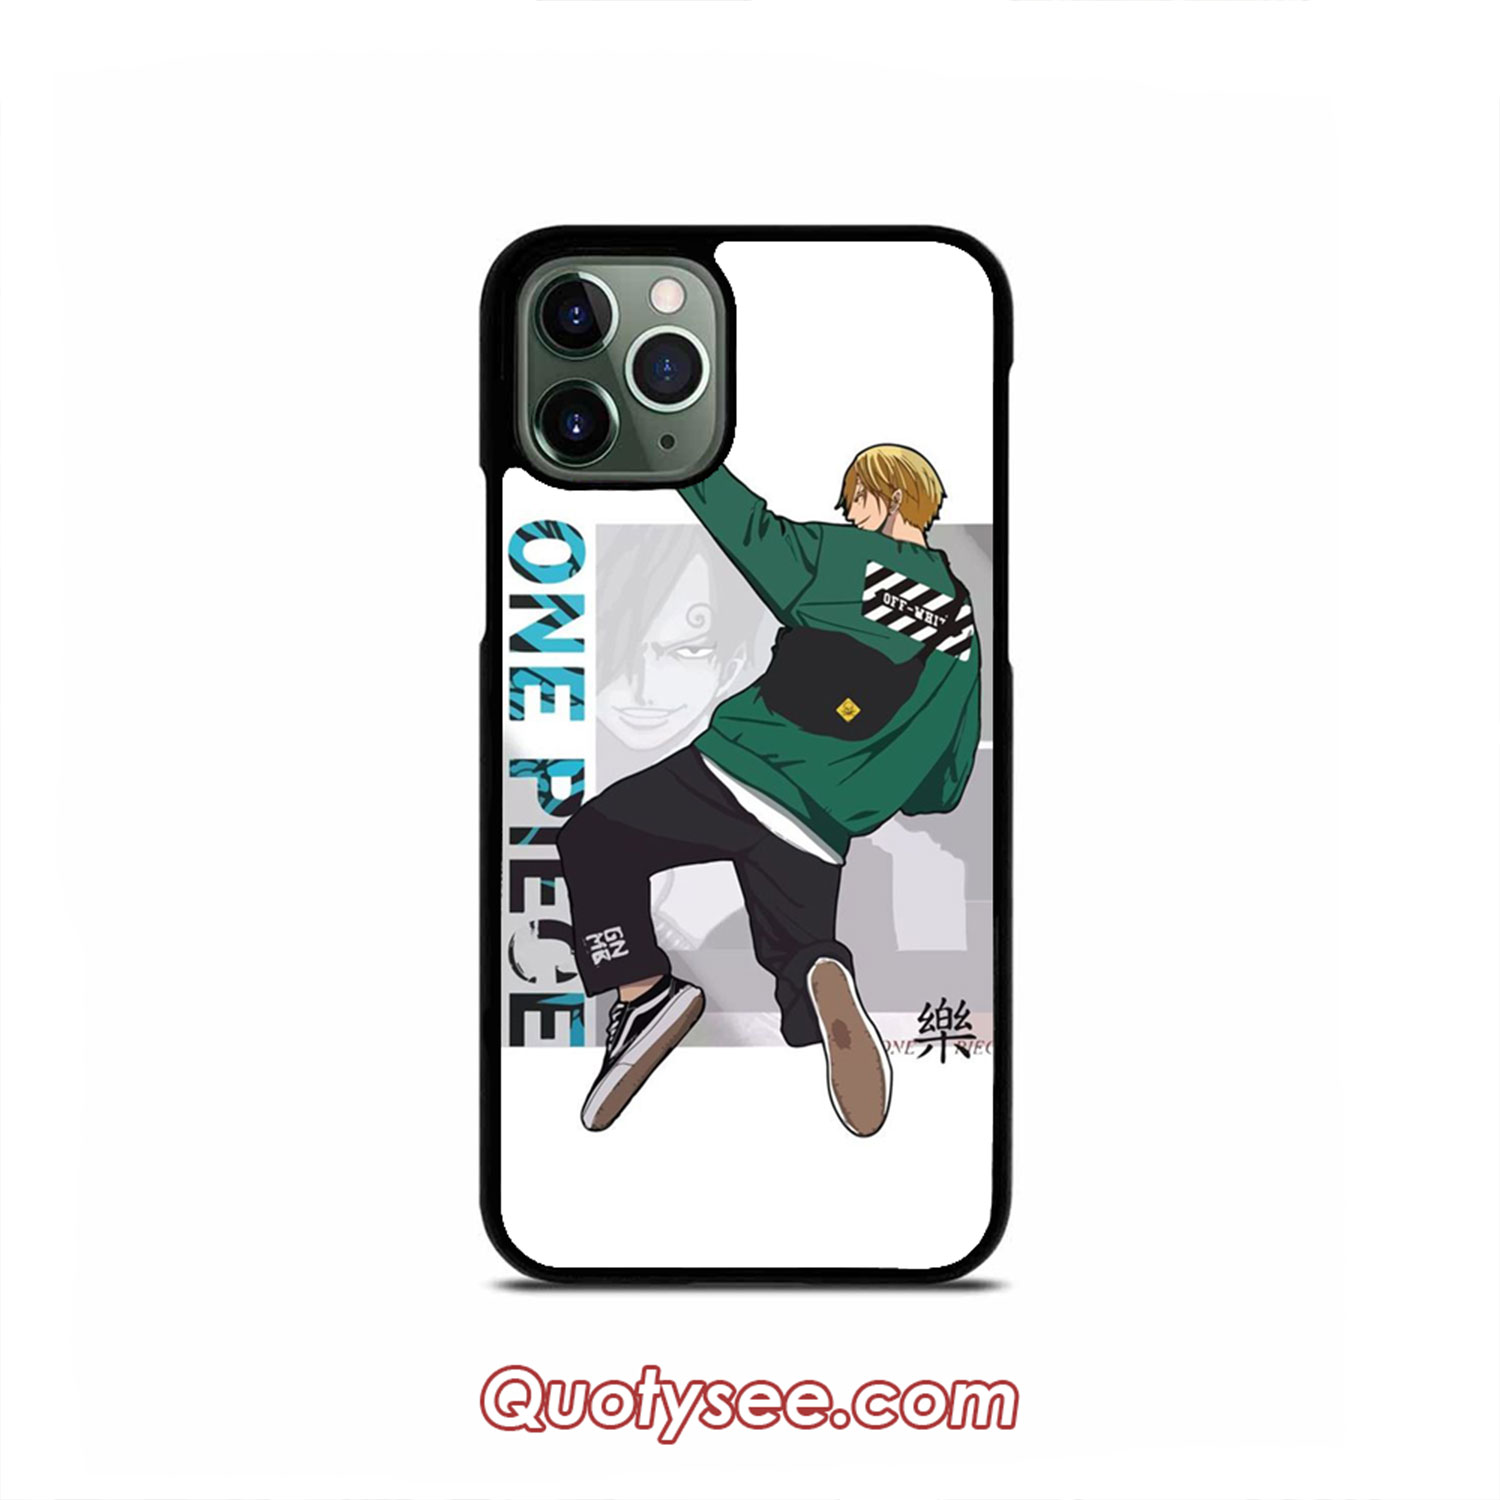 Sanji White One Piece iPhone Case 11/11 Pro/11 Pro Max,XS Max,XR,X,8/8 Plus,7/7 Plus,6/6S | Quotysee.com